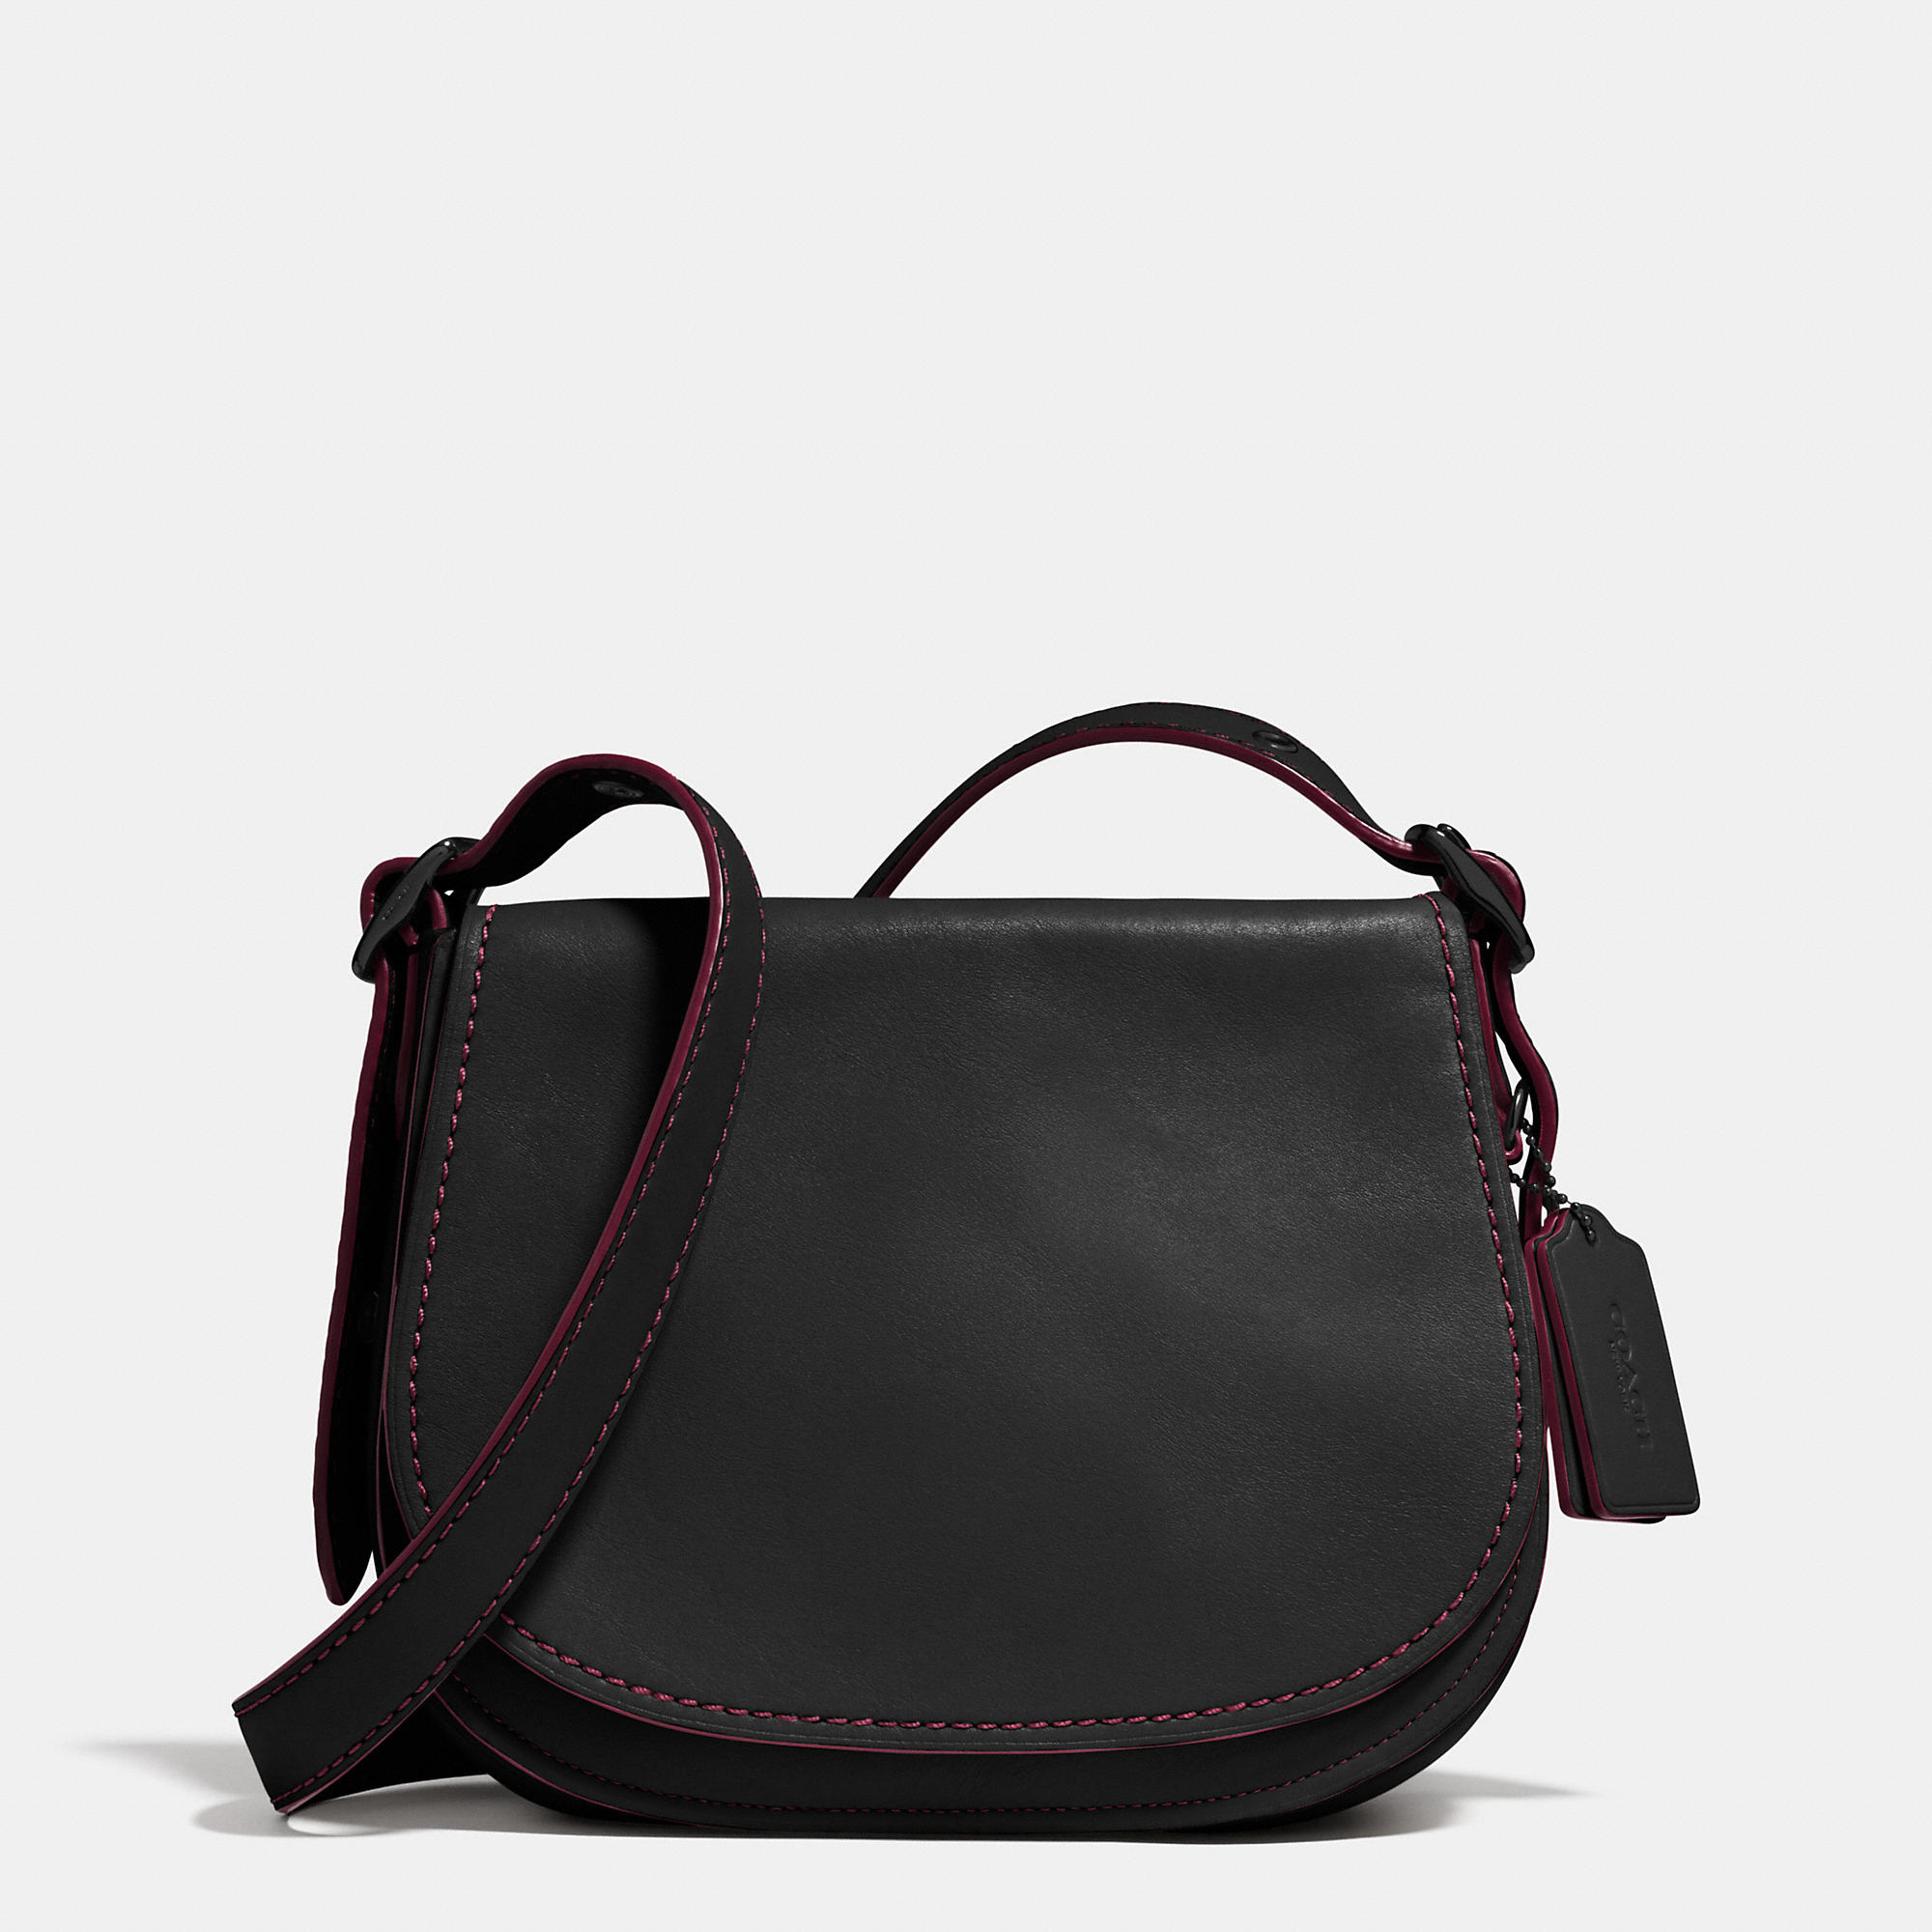 Lyst - Coach Saddle Bag 23 In Glovetanned Leather in Black